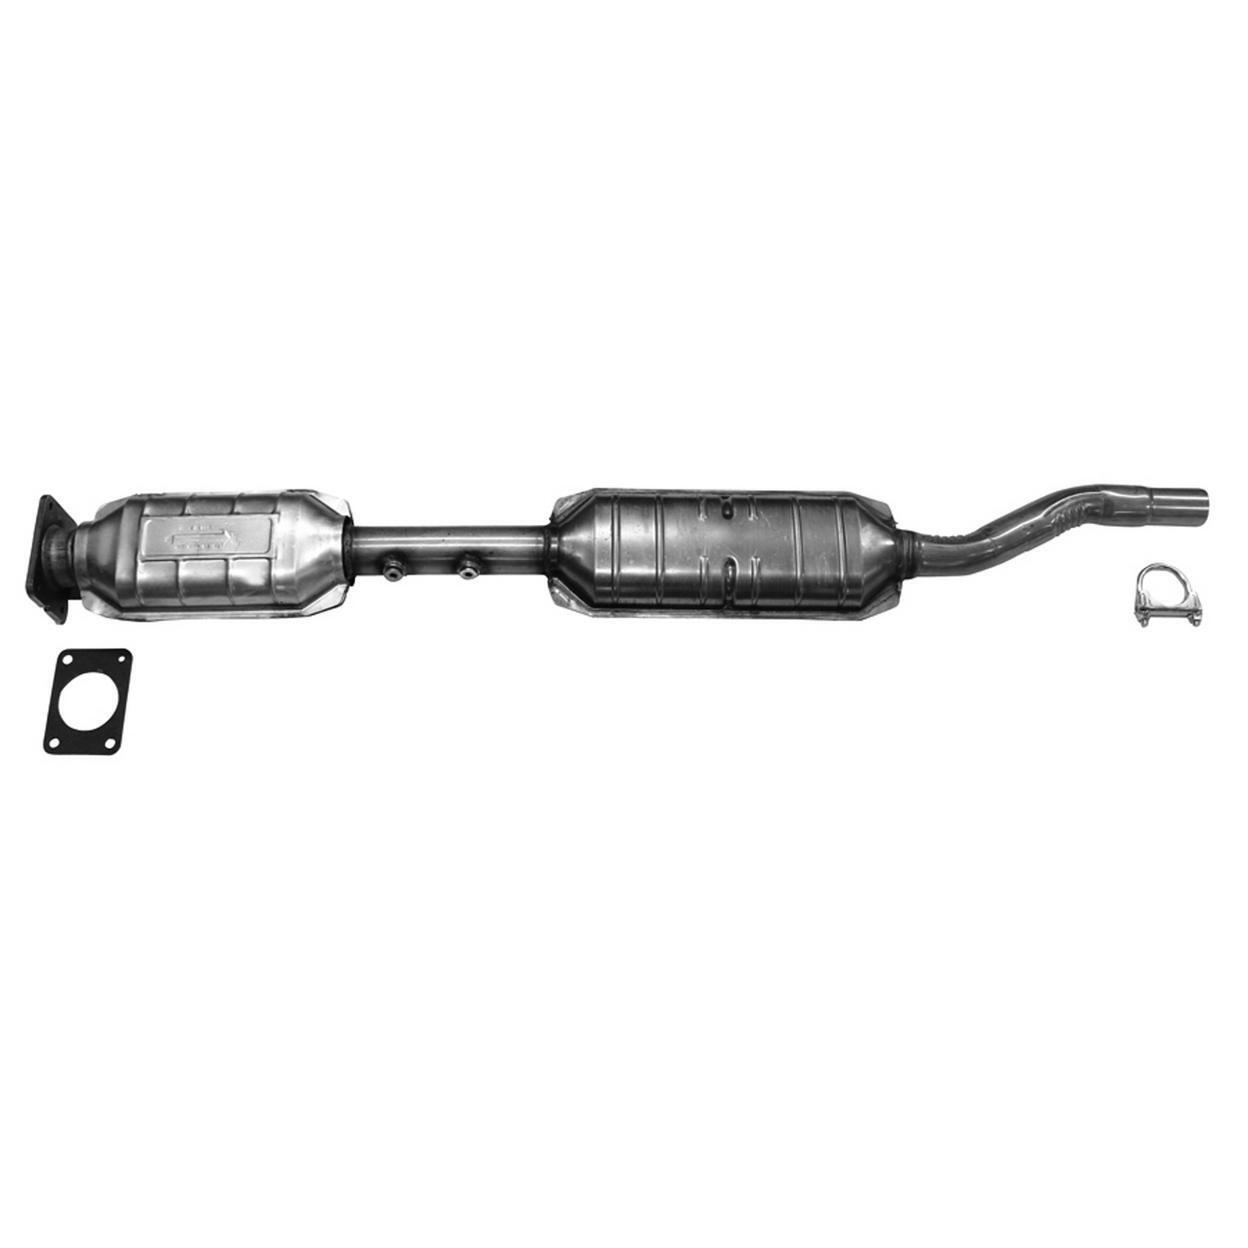 N/A Catalytic Converter Fits 2002 Cadillac Seville